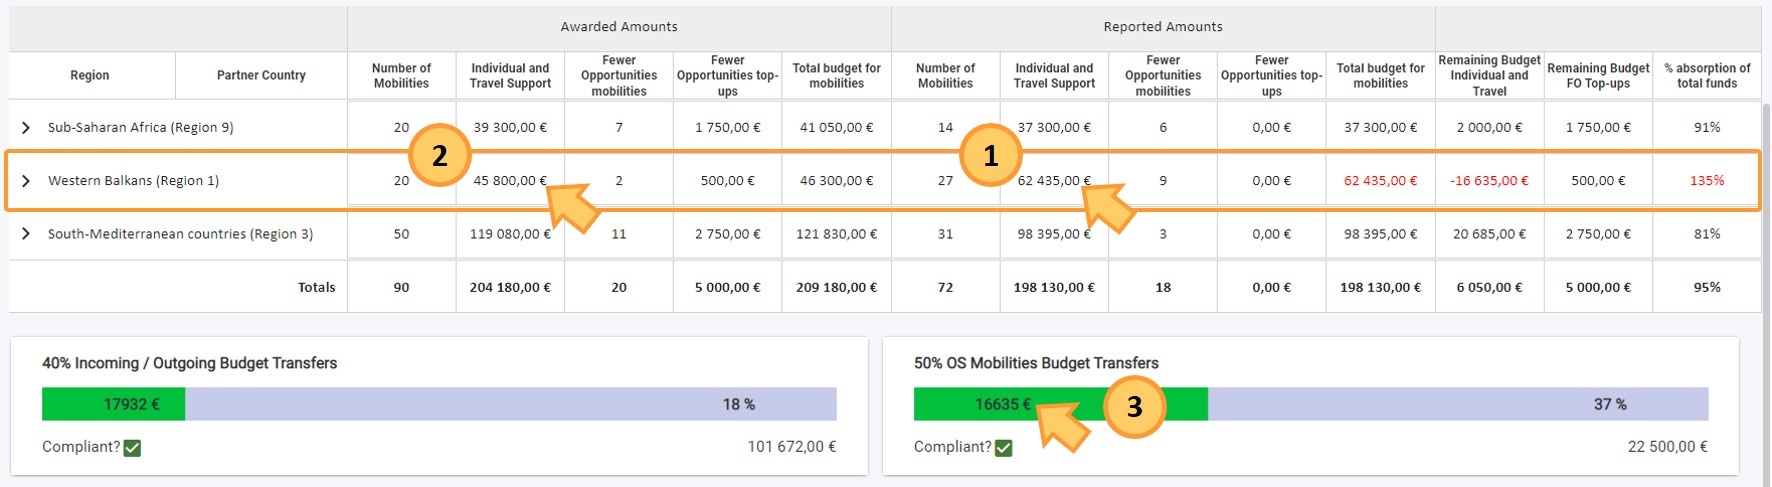 Example of compliant OS Mobilities Budget Transfers